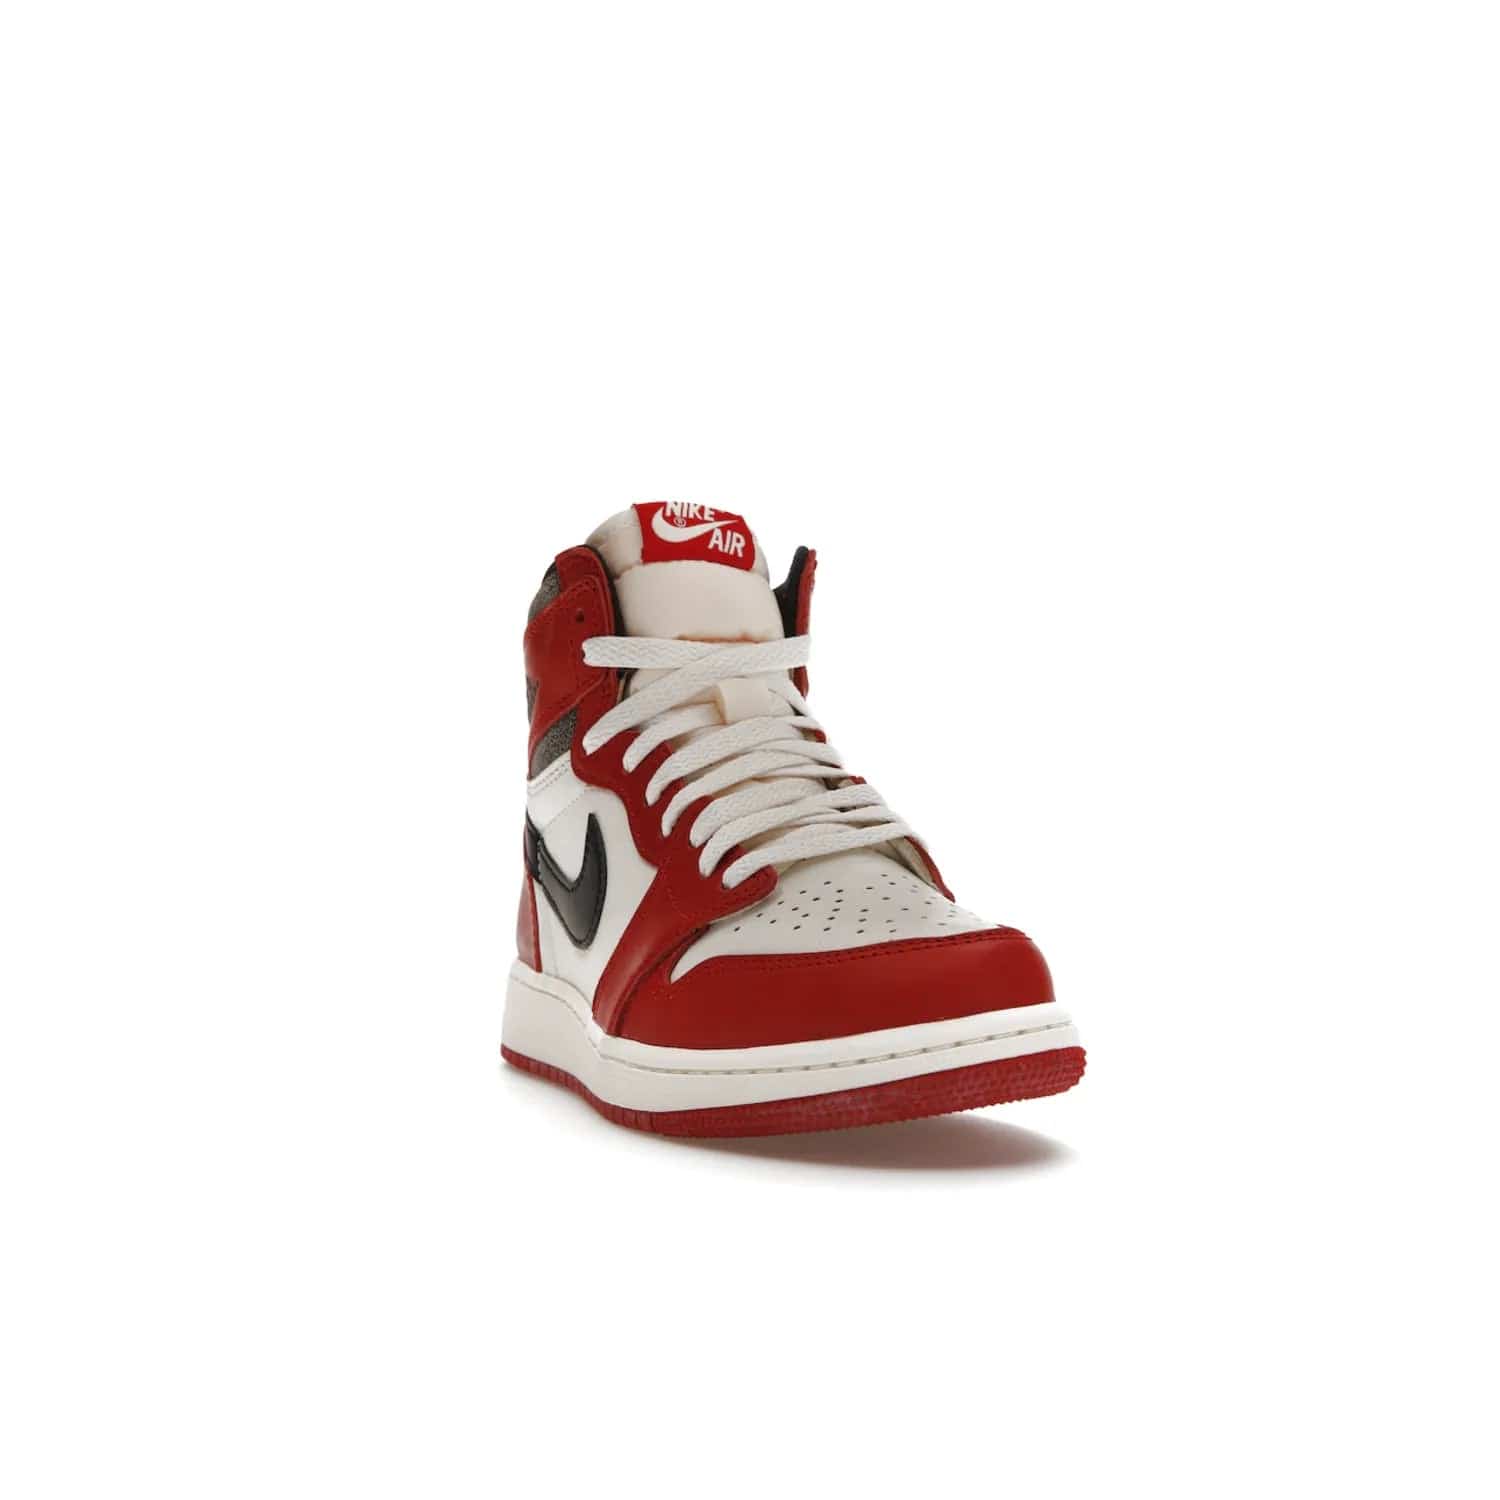 Jordan 1 Retro High OG Chicago Lost and Found (GS) - Image 8 - Only at www.BallersClubKickz.com - Grab the Air Jordan 1 Retro High OG Chicago Reimagined GS, presenting in classic 1985 silhouette. Varsity Red, Black, Muslin and Sail hues, featuring Nike Air branding, Wings on the collars and printed insoles. Don't miss out when it releases 19th Nov 2022.